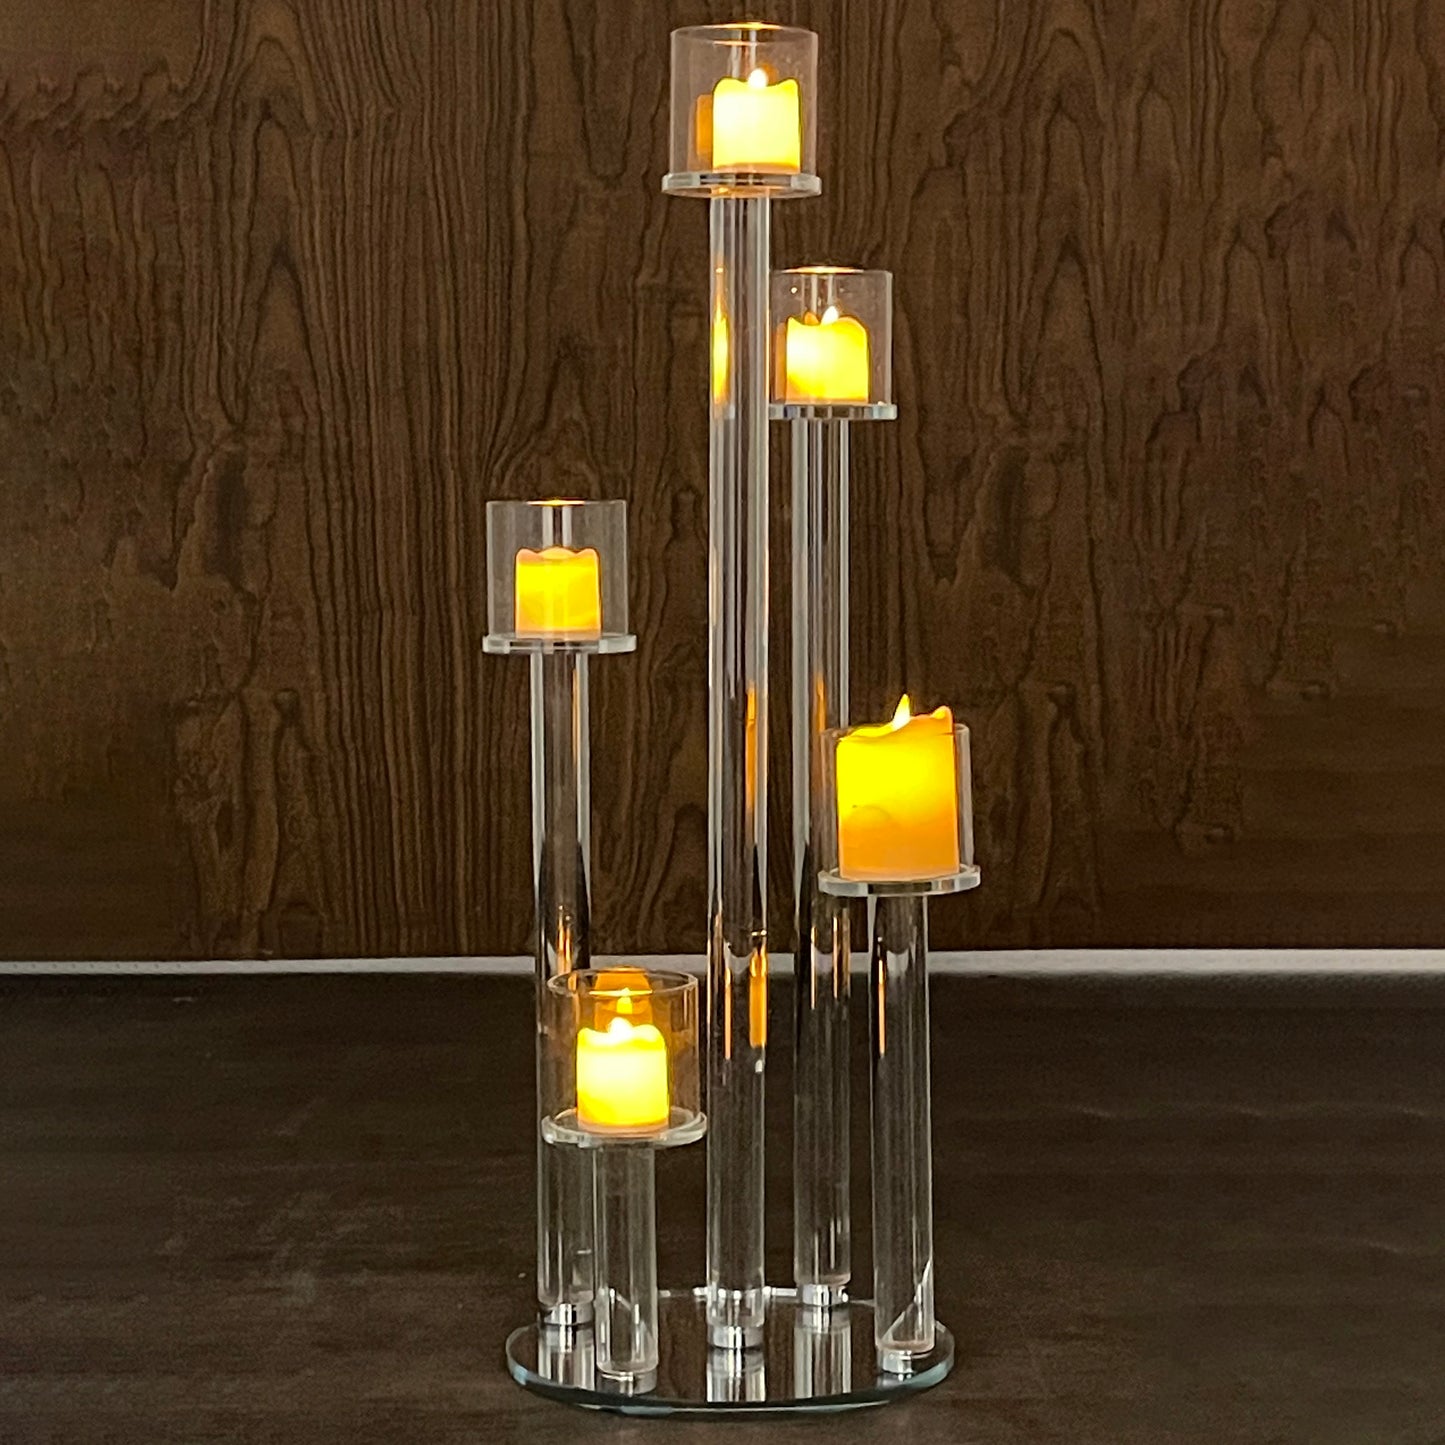 Allgala Candelabra 23" (58CM) Tall 5-Cup Crystal Solid Glass Tube Rod Supported Votive Candelabra-HD89128